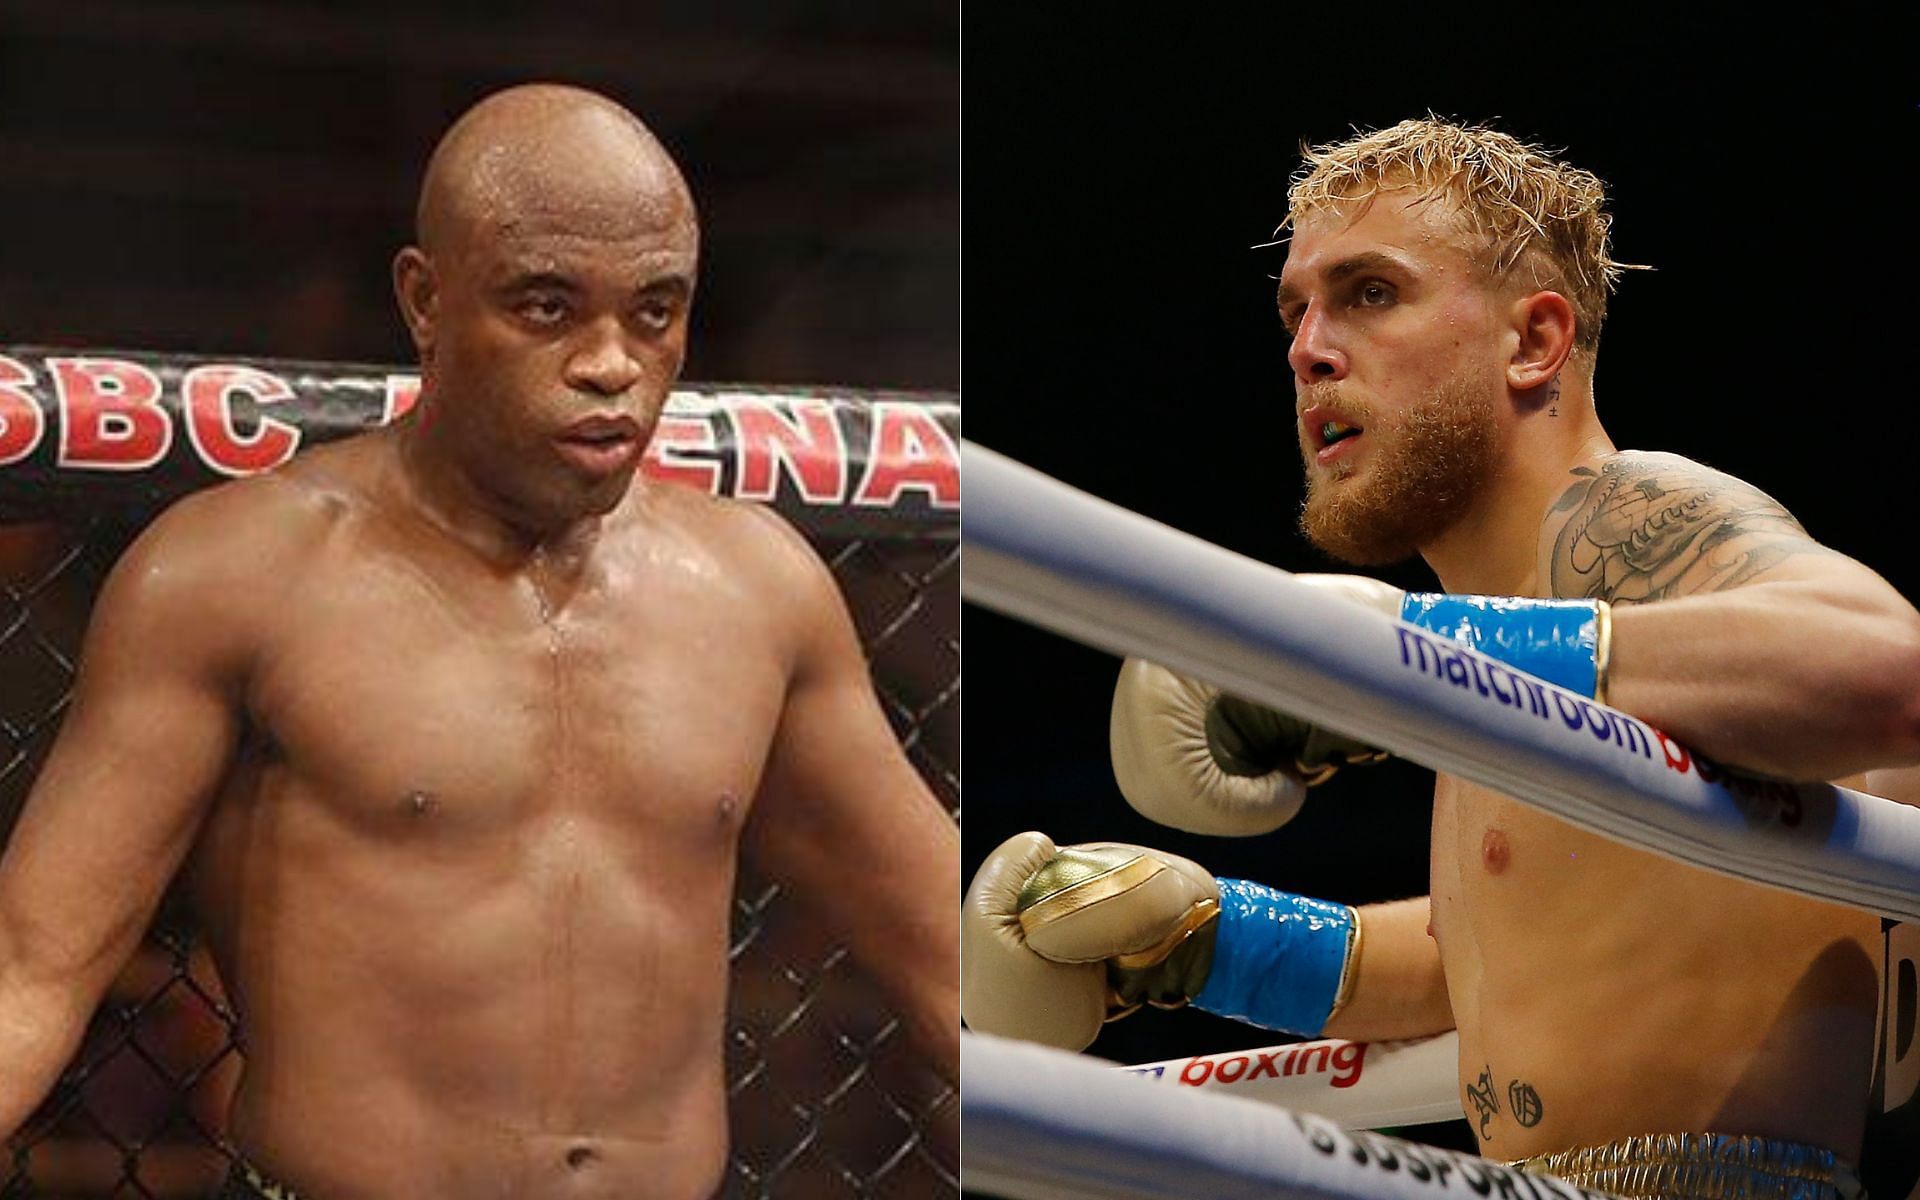 Should Jake Paul really pursue a fight with Anderson Silva?